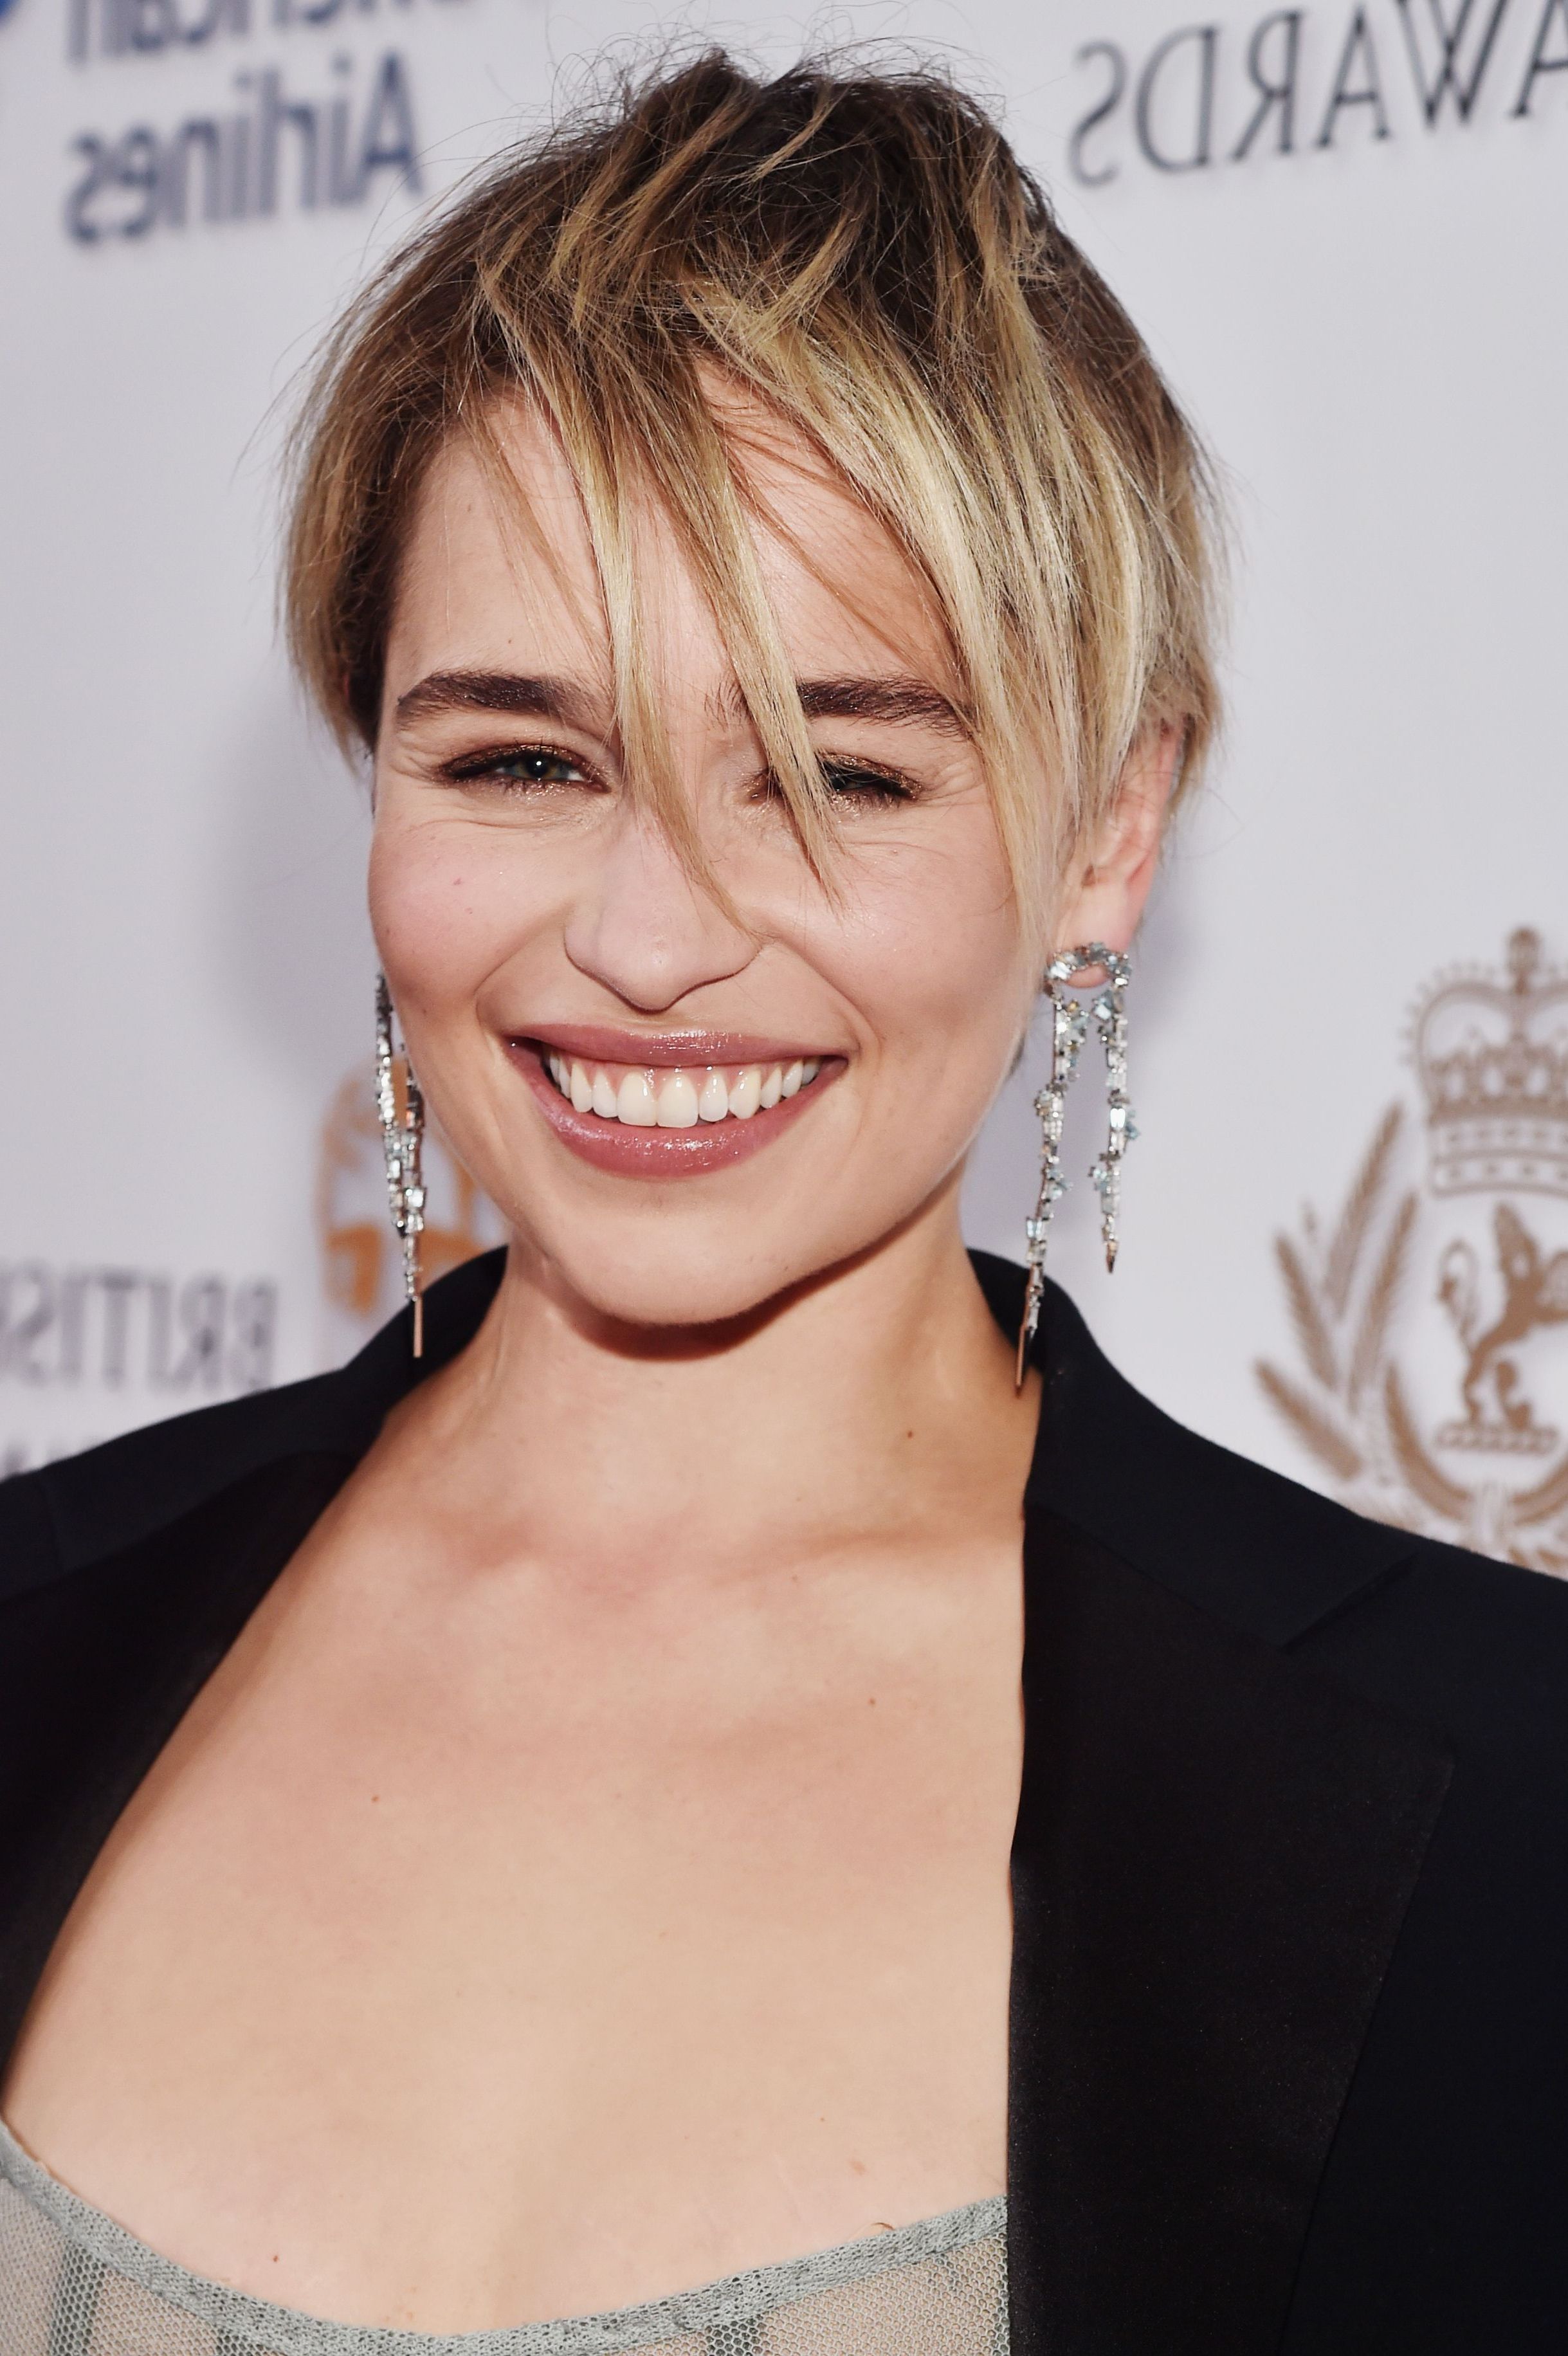 70 Best Pixie Cut Hairstyle Ideas 2019 – Cute Celebrity Pixie Haircuts Regarding Current Chopped Chocolate Brown Hairstyles For Long Hair (View 18 of 20)